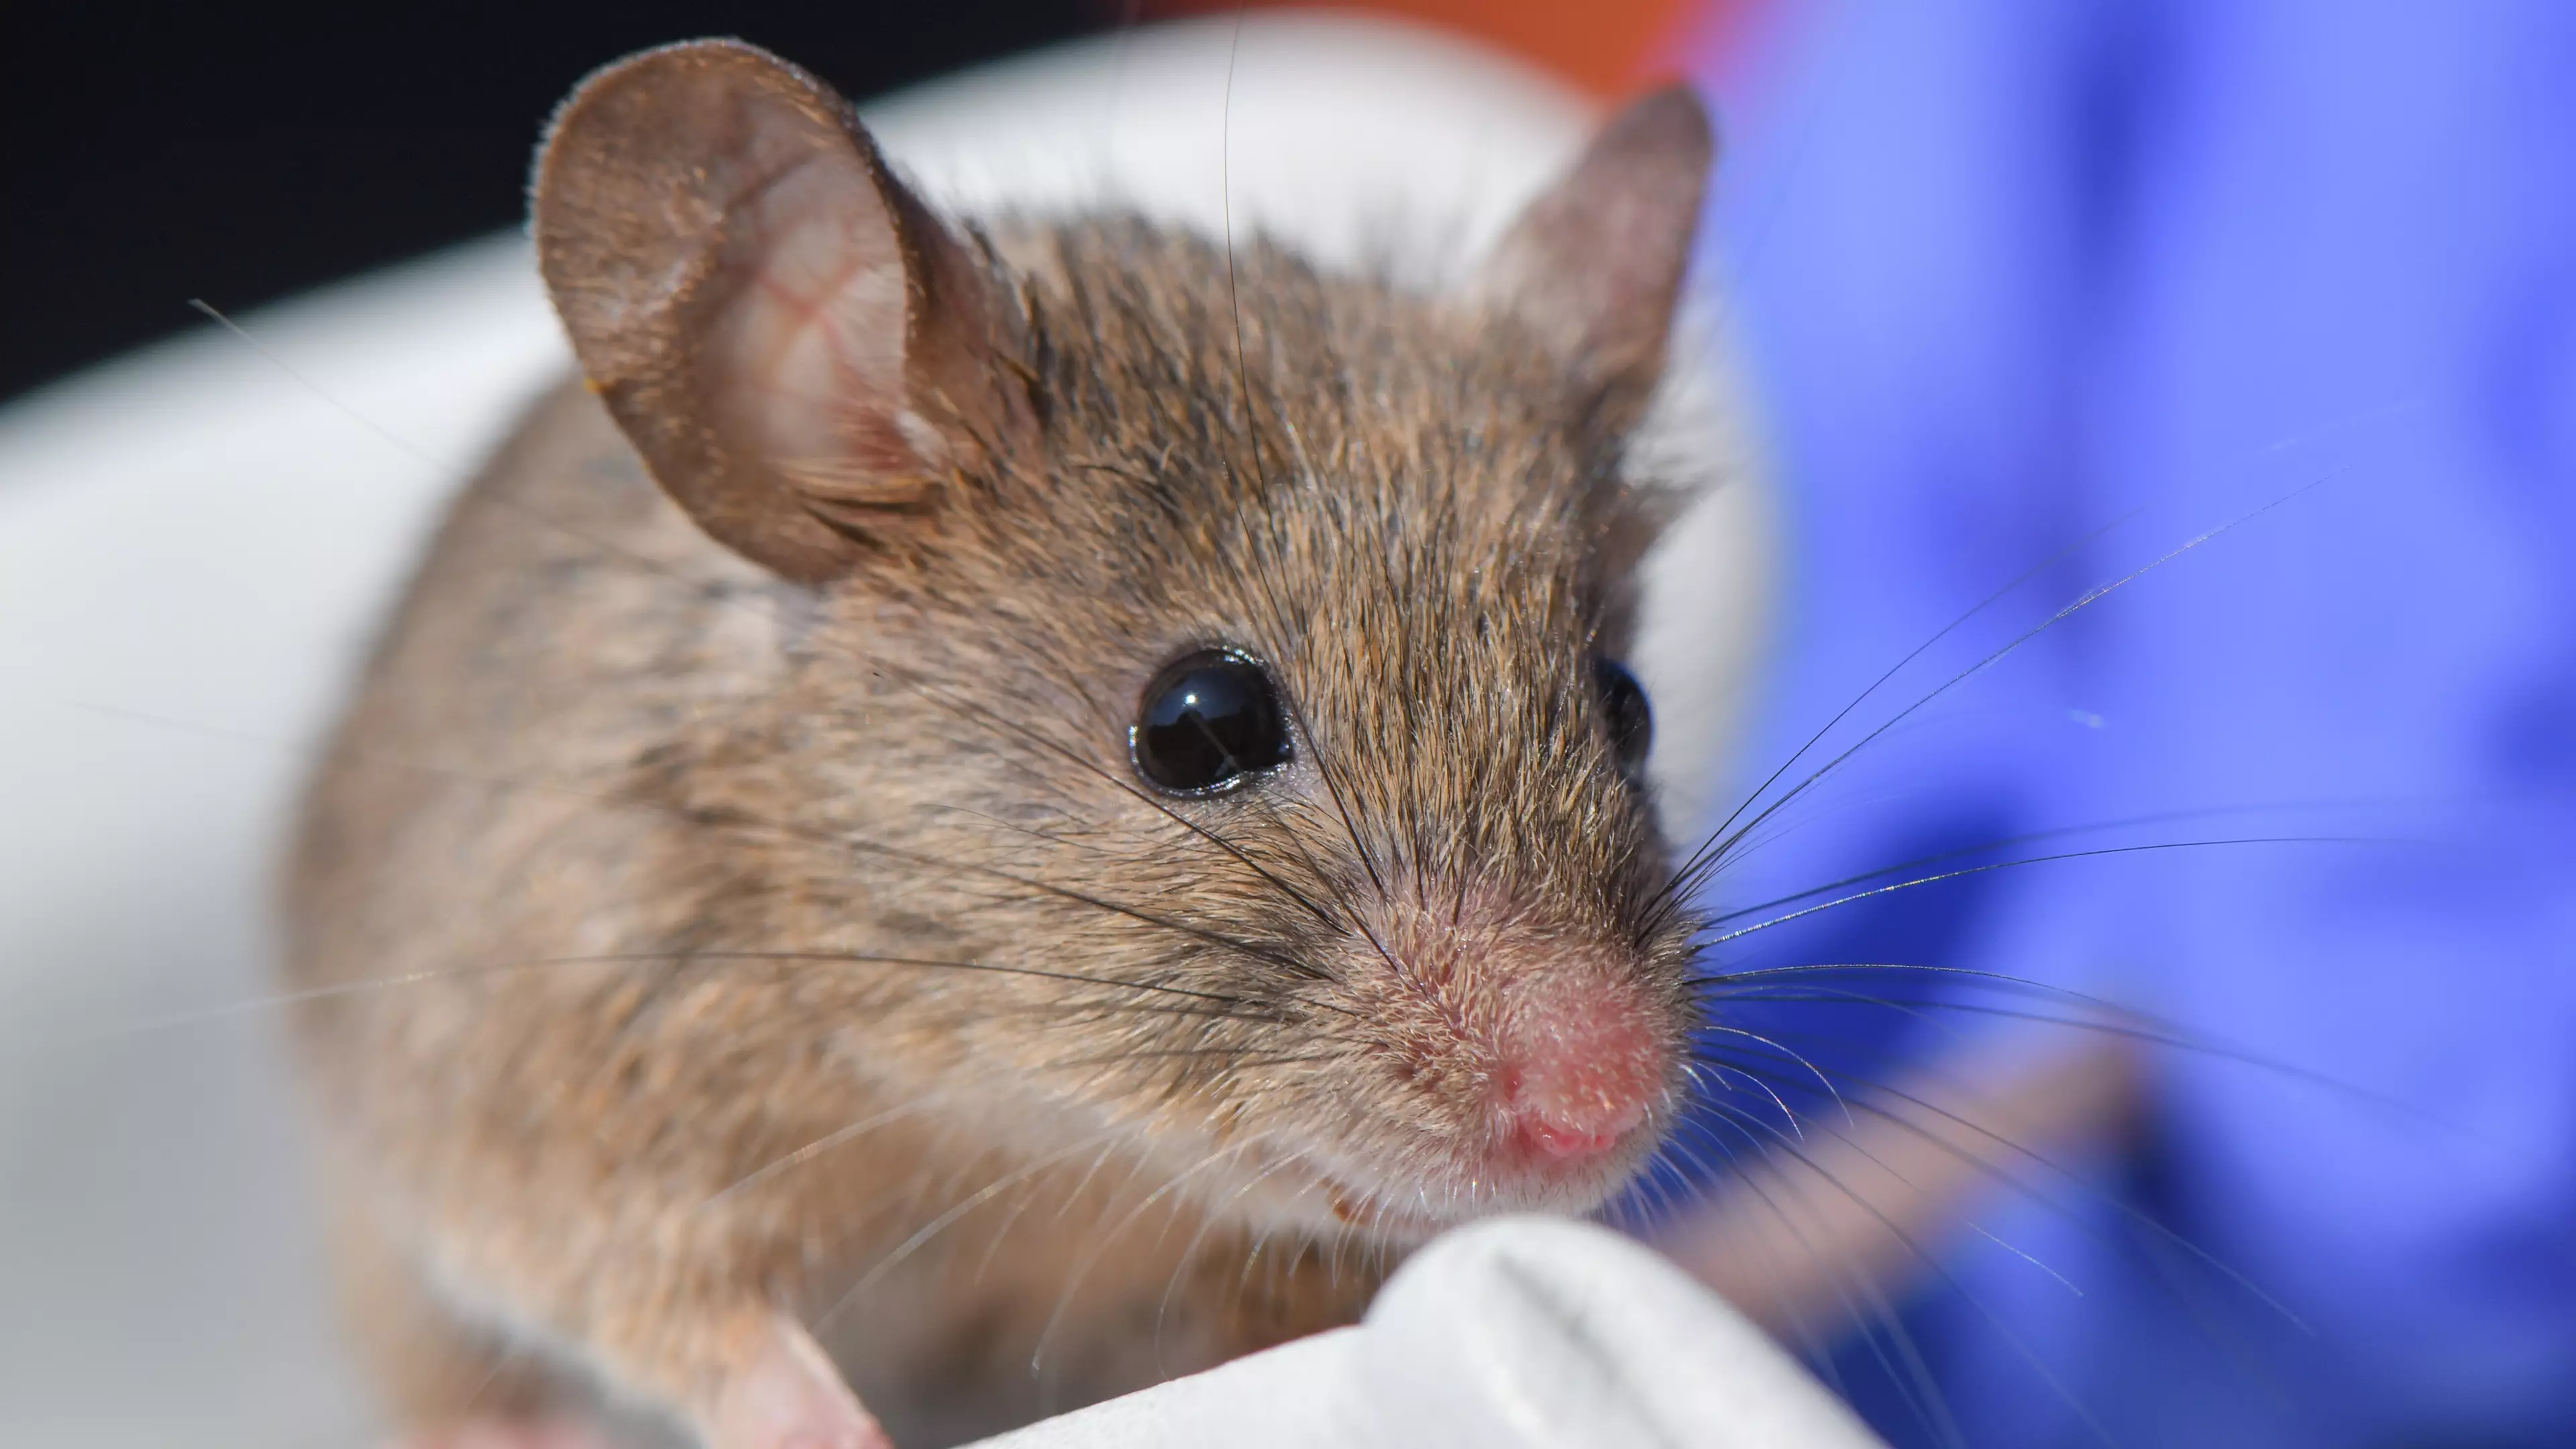 Australian Woman Wakes Up To Find Mouse Is Chewing Her Eyeball